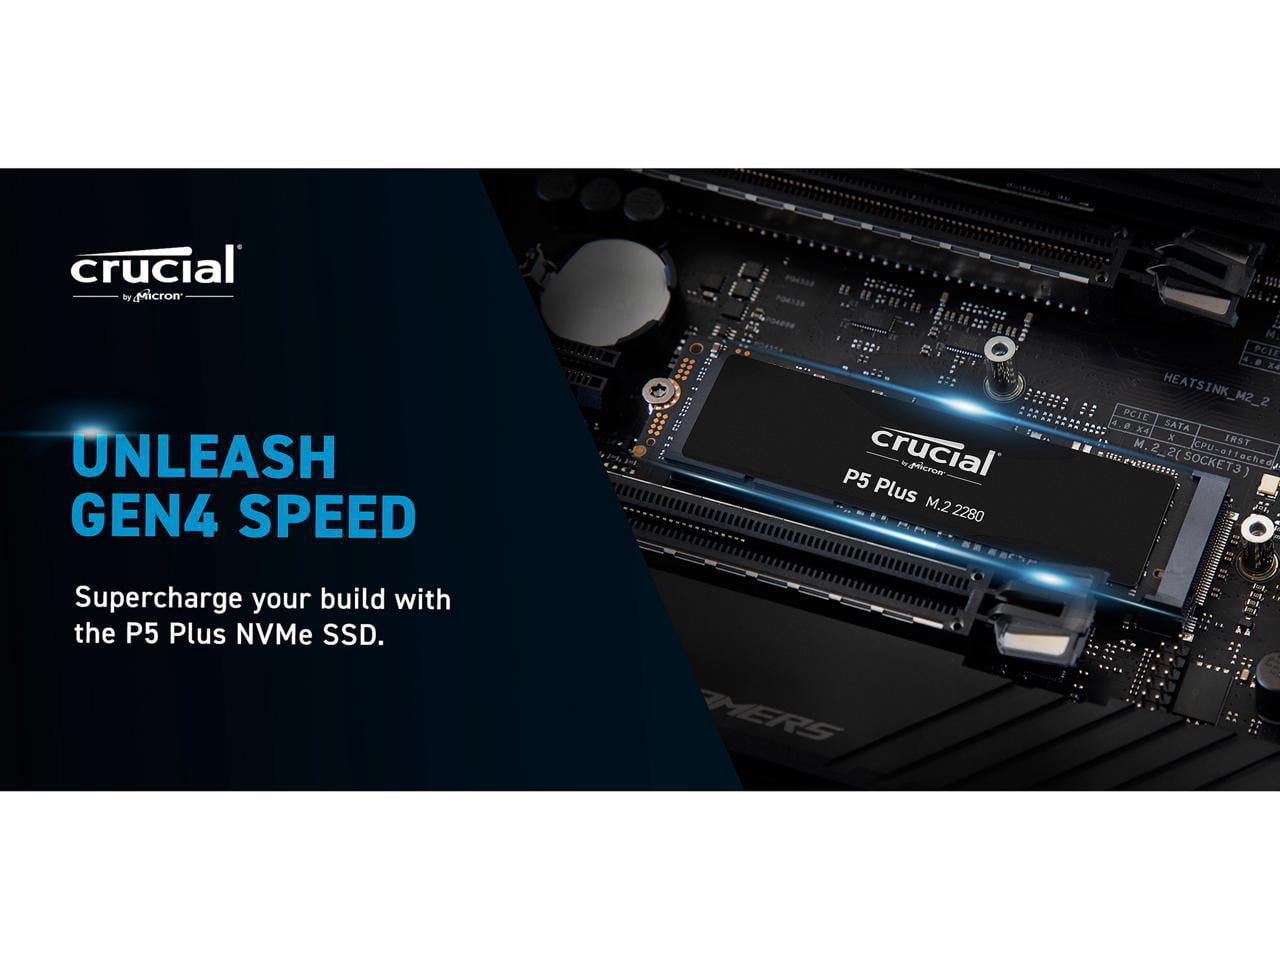 SSD] Crucial 2TB P5 Plus PCIe 4.0 SSD - $110.99 ($39.00 Coupon Applied in  Cart) : r/buildapcsales